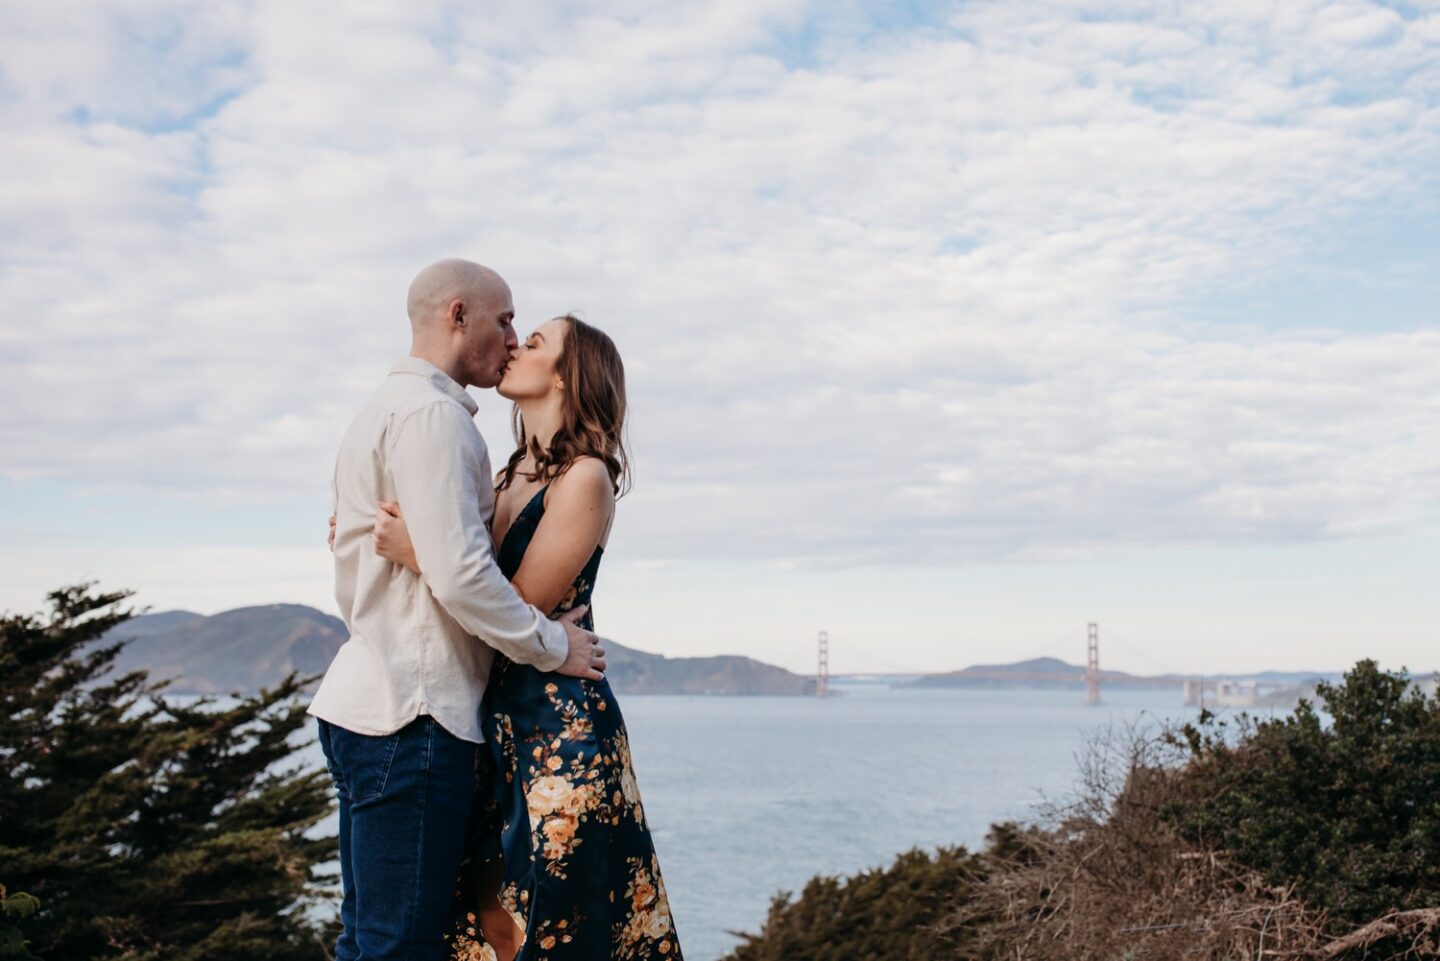 Couple kisses with a view of the Golden Gate Bridge in the background during their Sutro Baths engagement photoshoot.